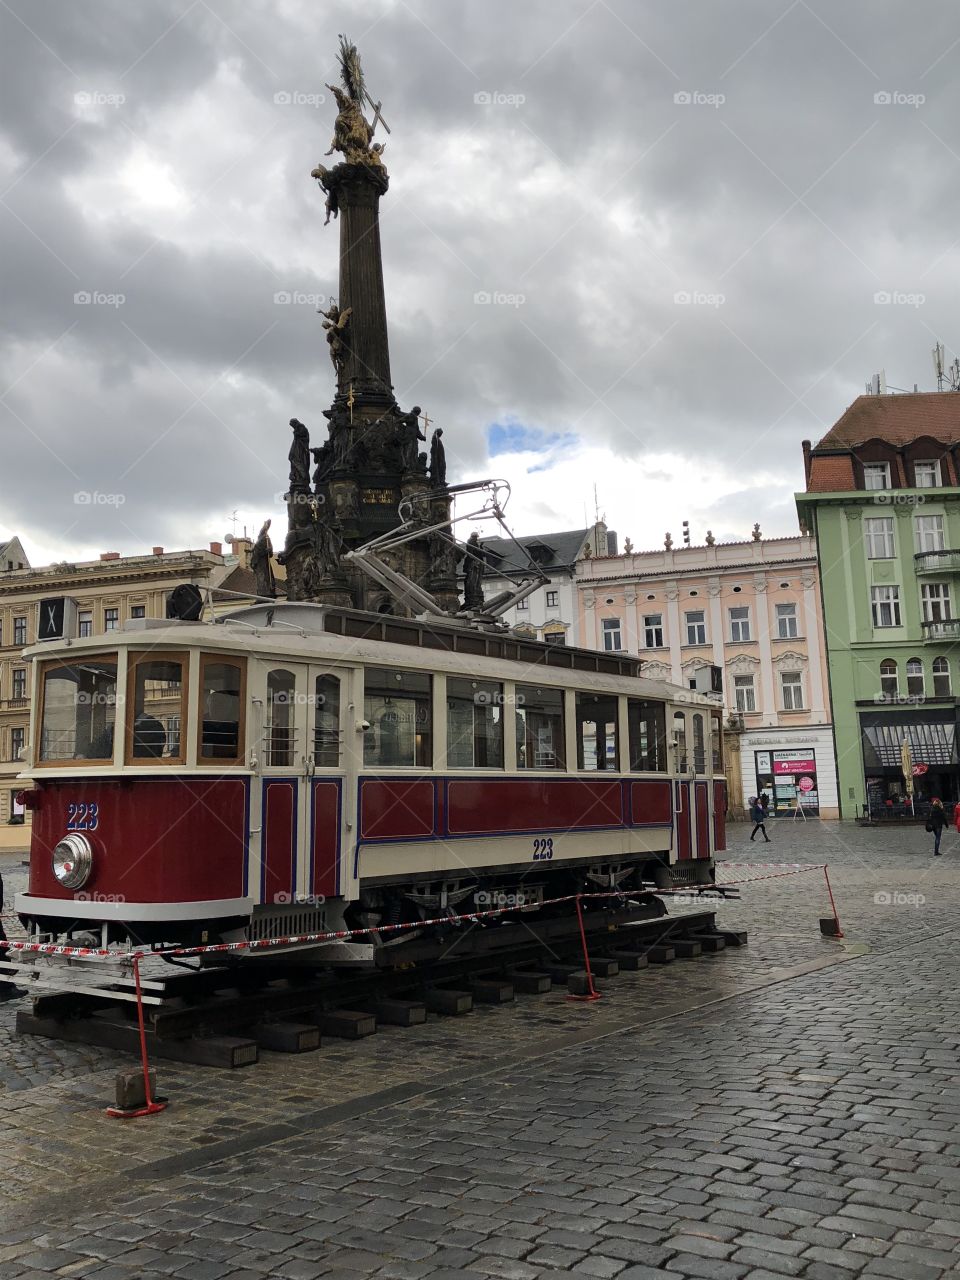 Tram on the square